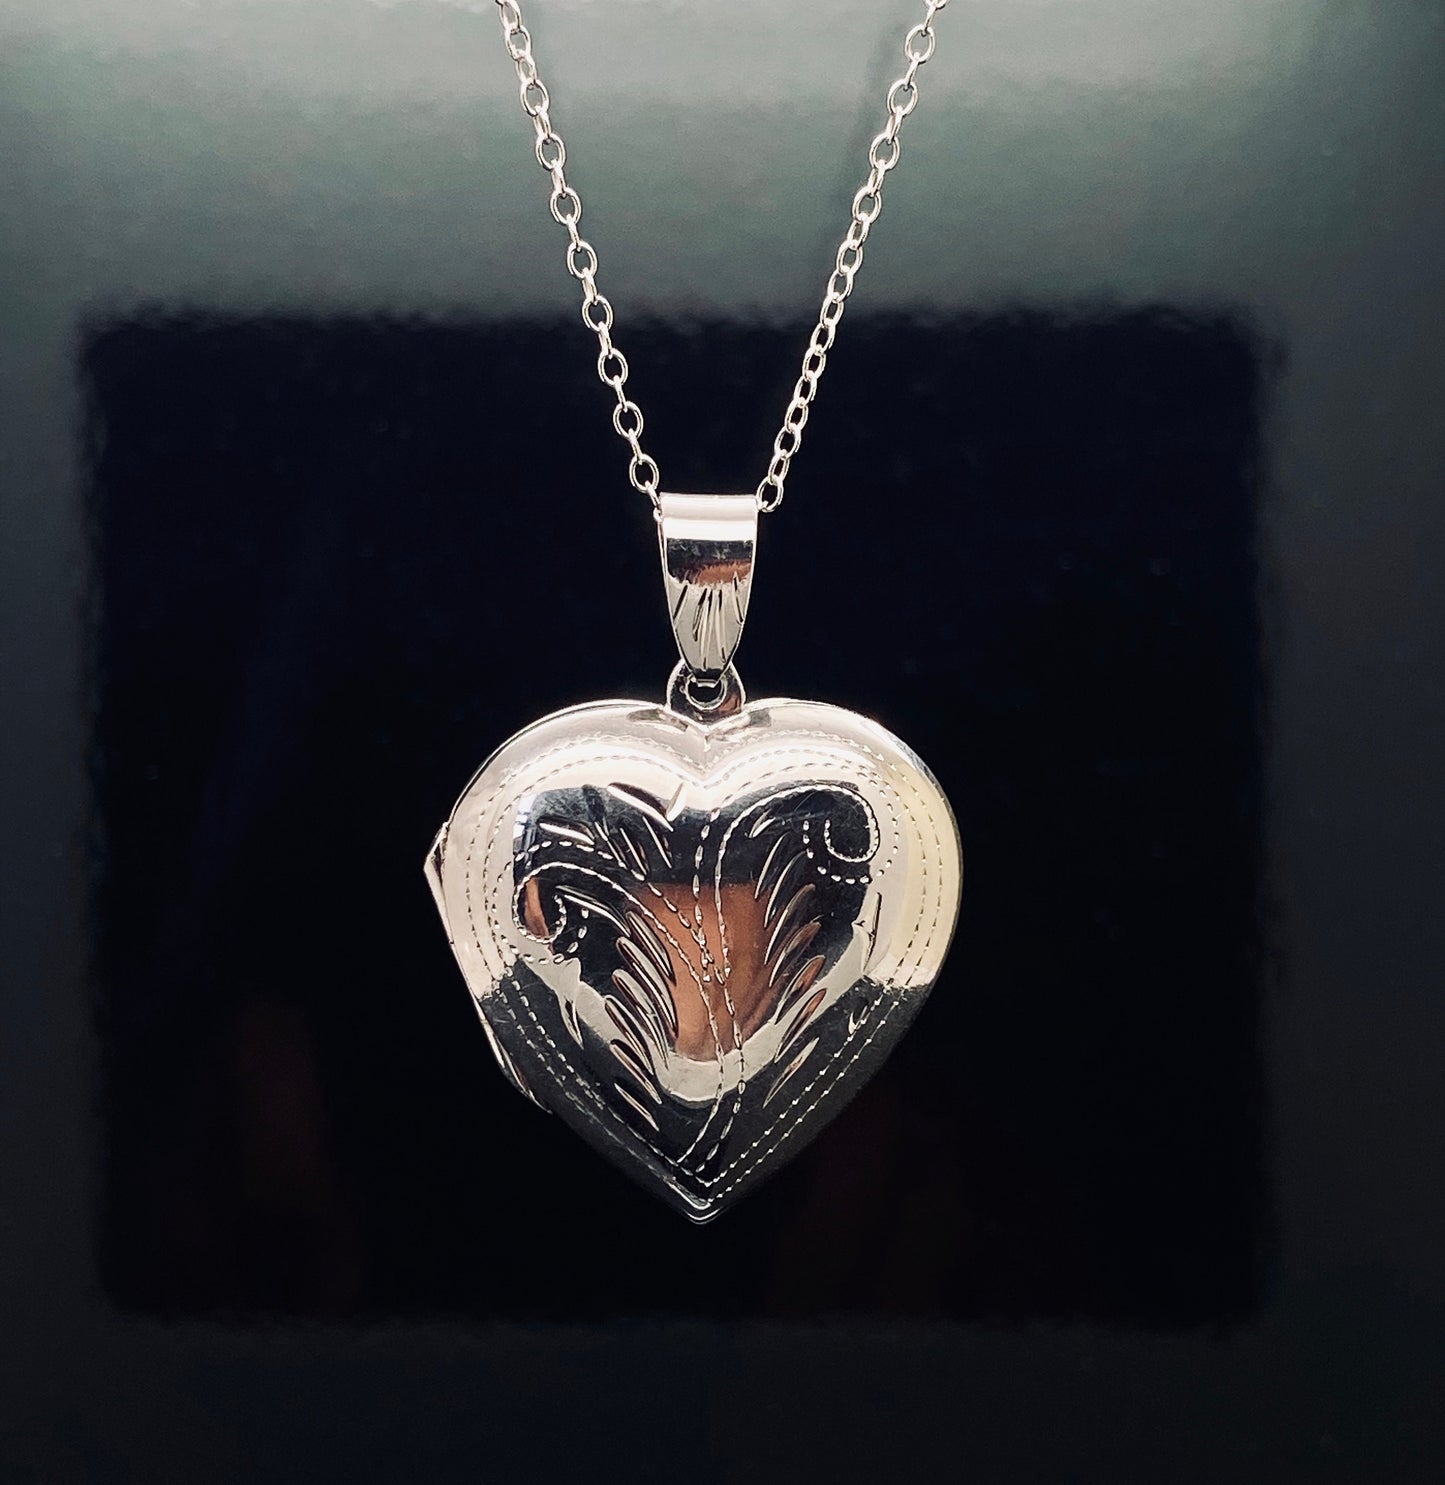 Etched Heart Locket Pendant Chain Necklace